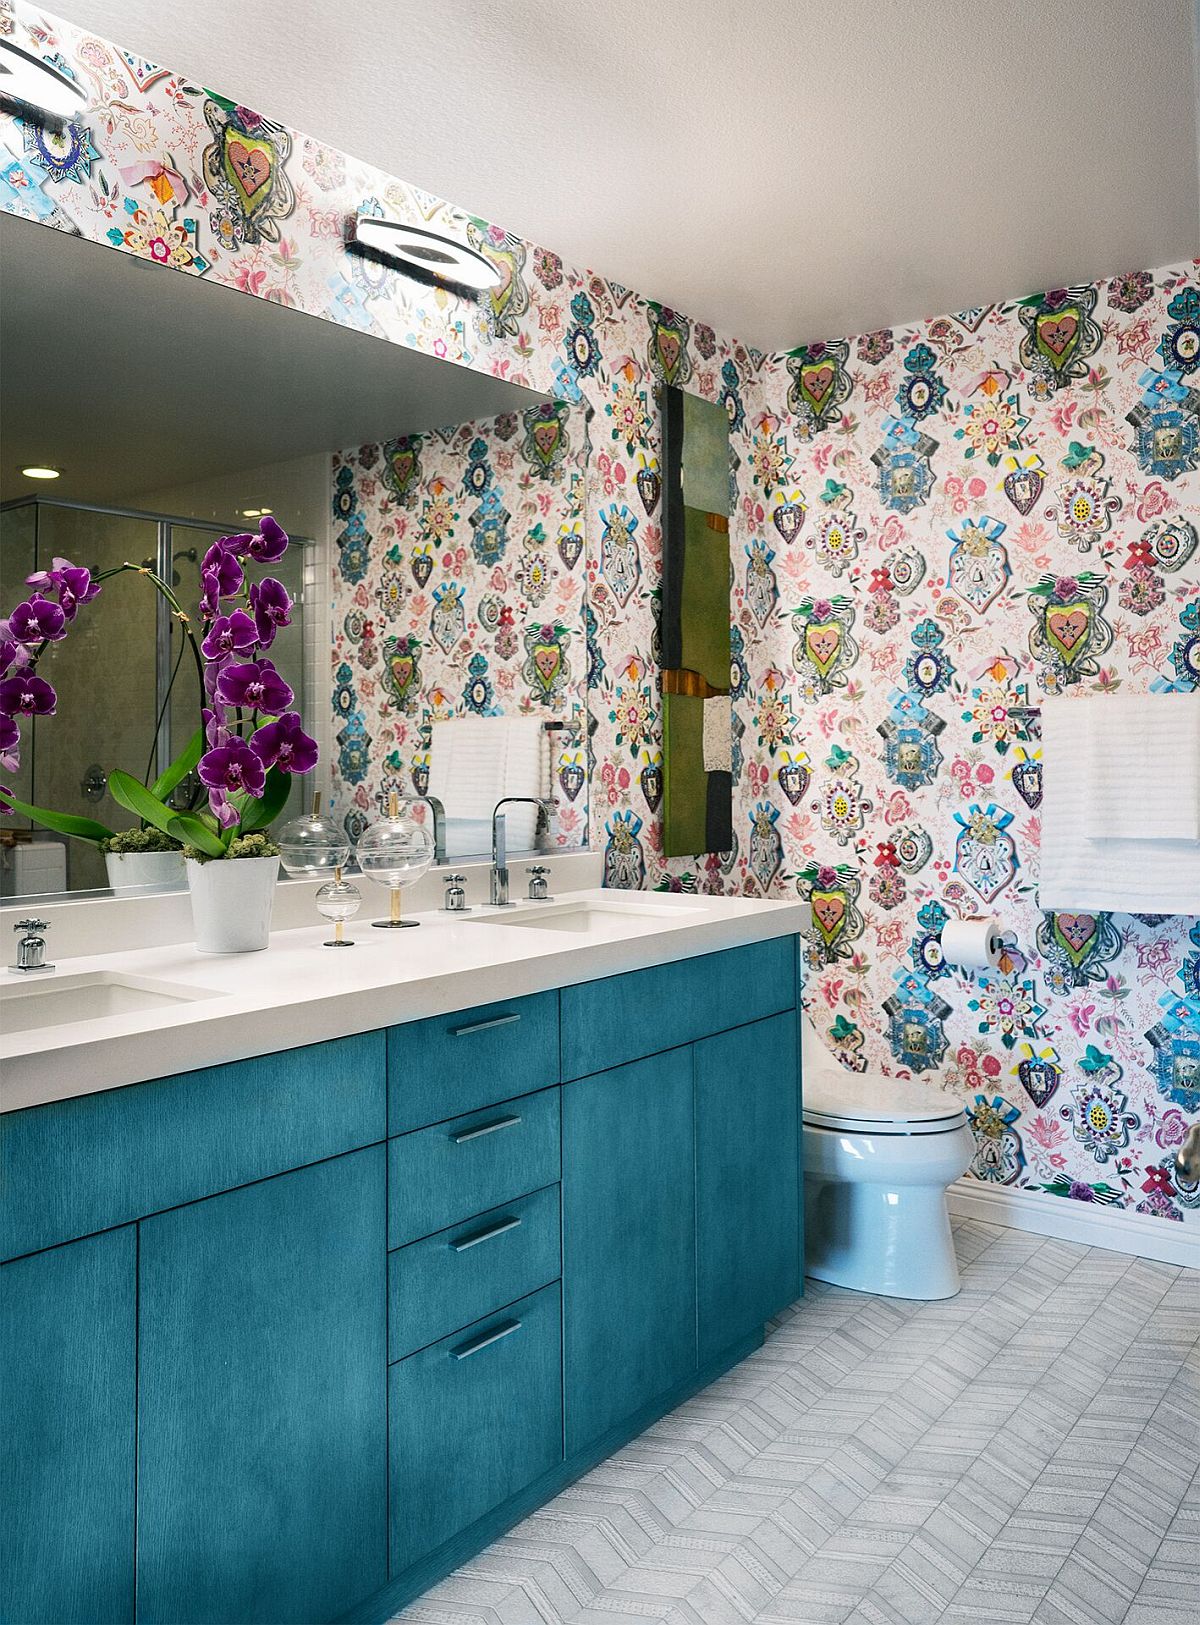 Unique shade of blue for the bathroom vanity coupled with lively wallpapered backdrop